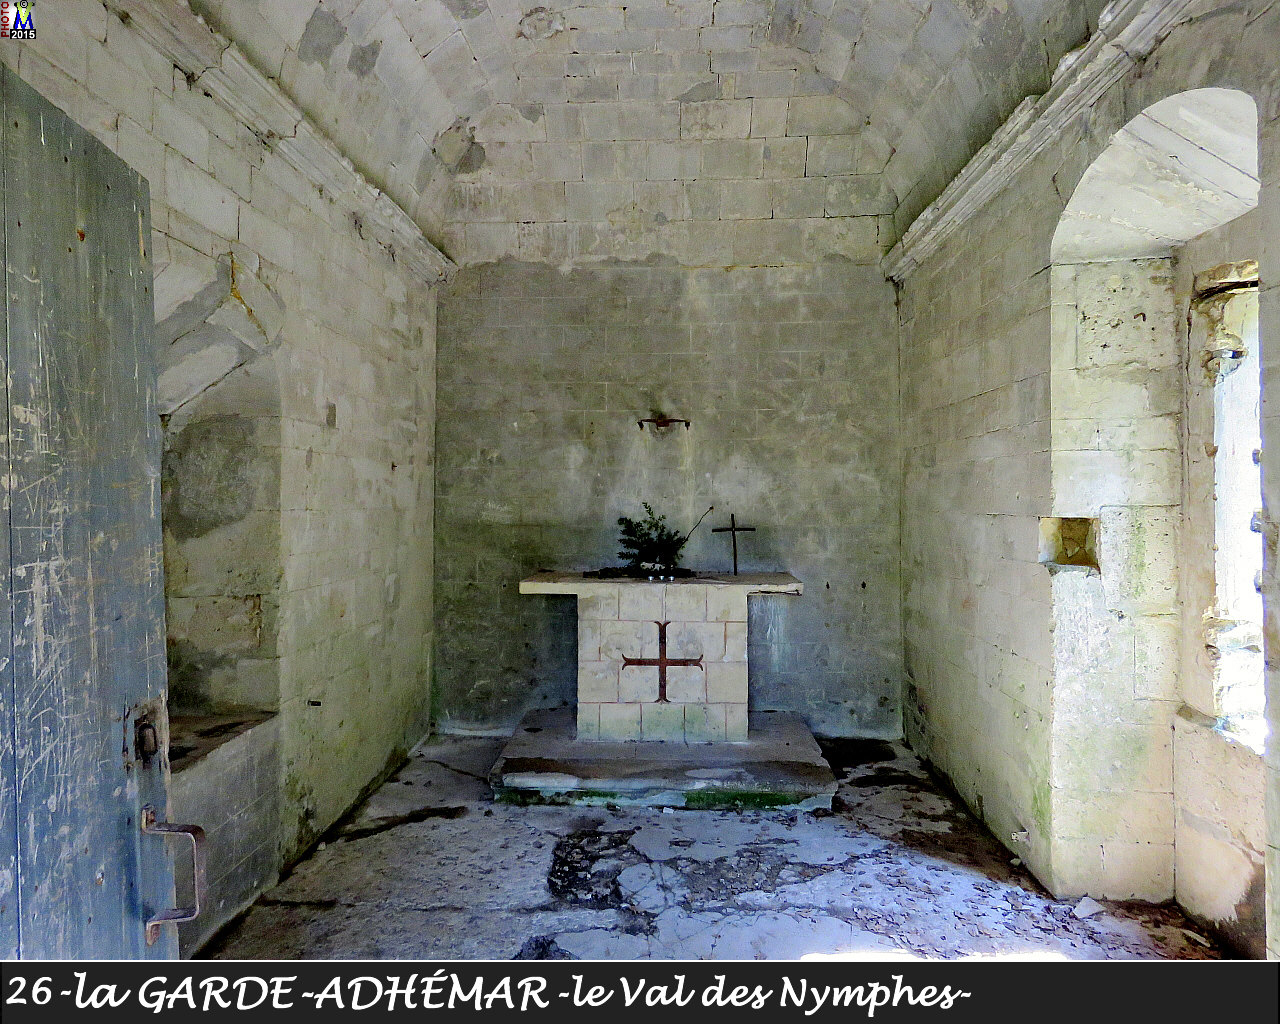 26GARDE-ADHEMARzVAL-NYMPHES_chapelle_304.jpg